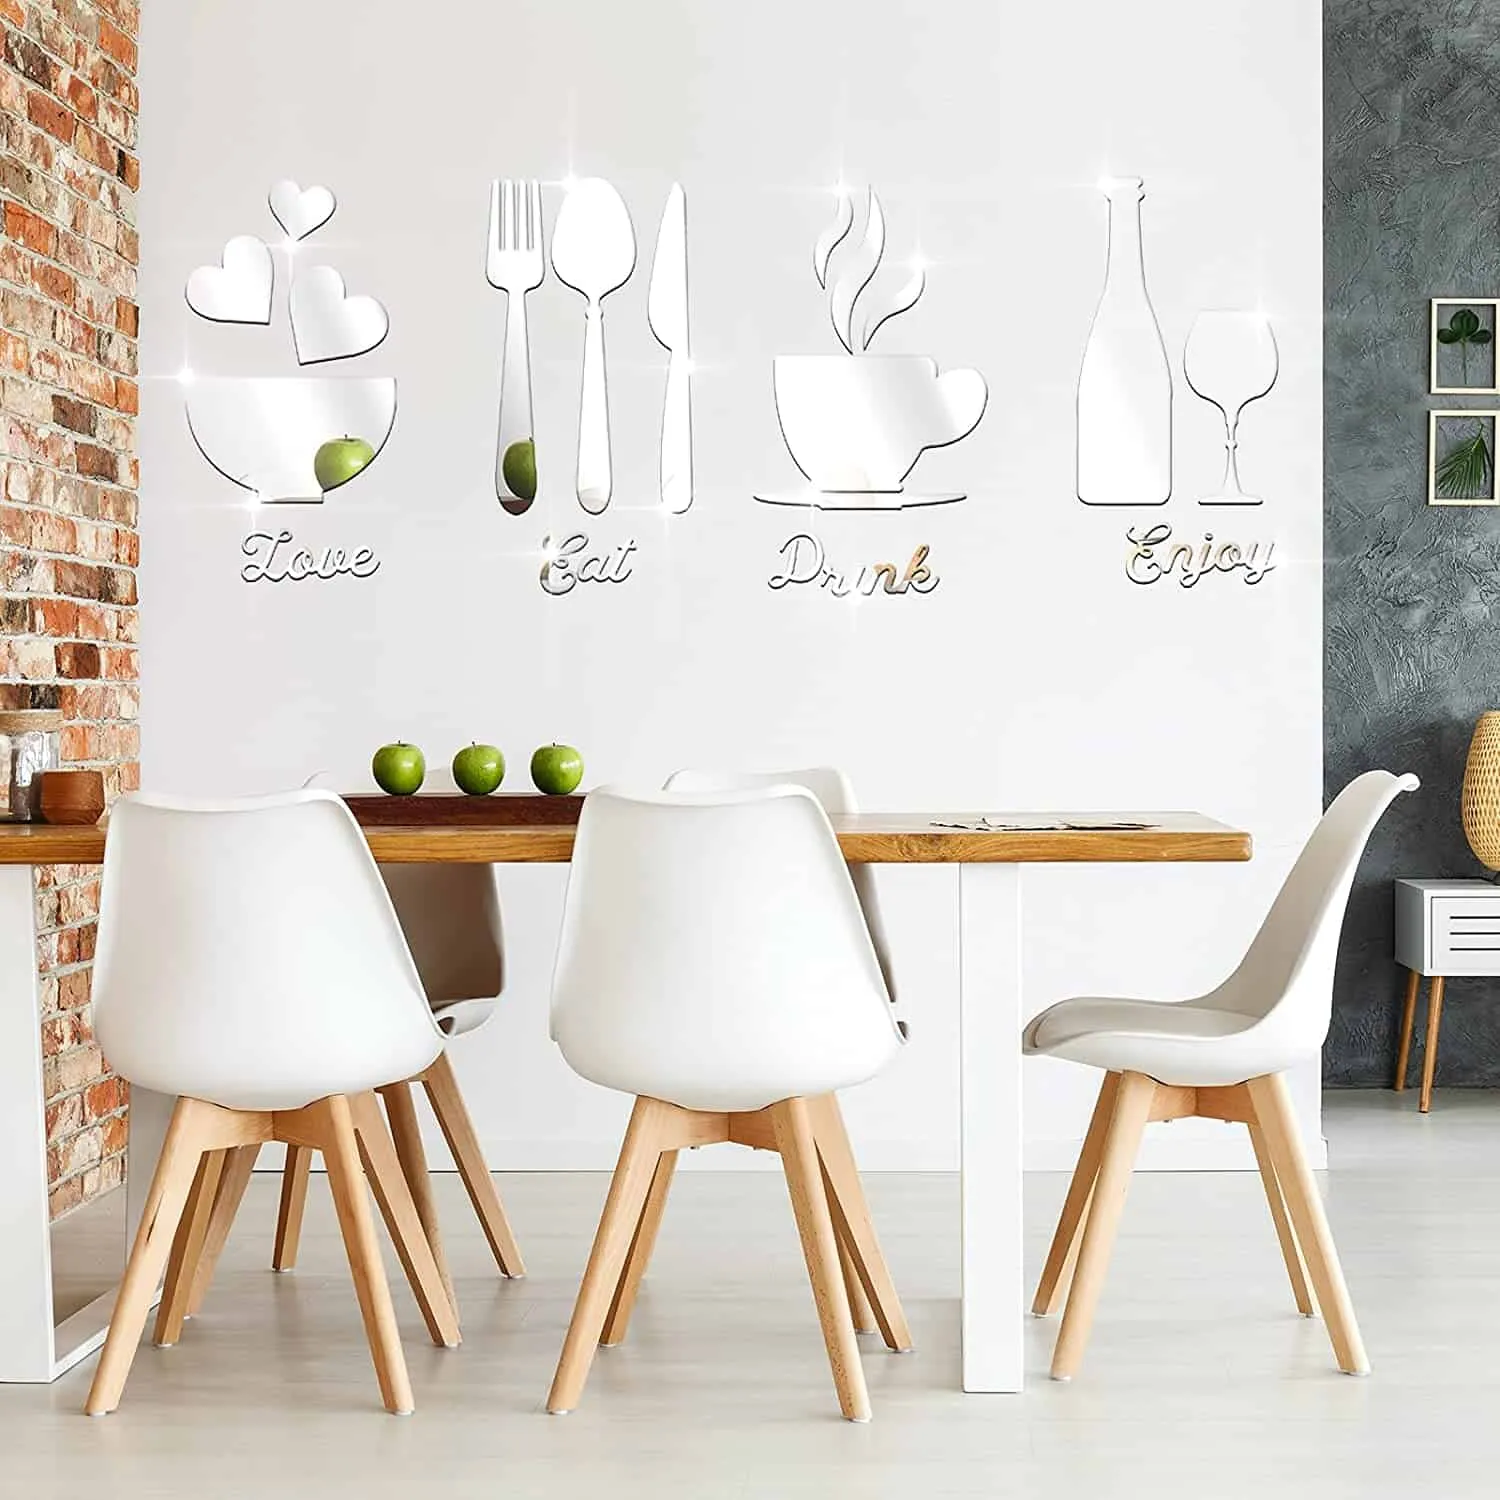 3D, mirror, kitchen wall sticker with a dining set.